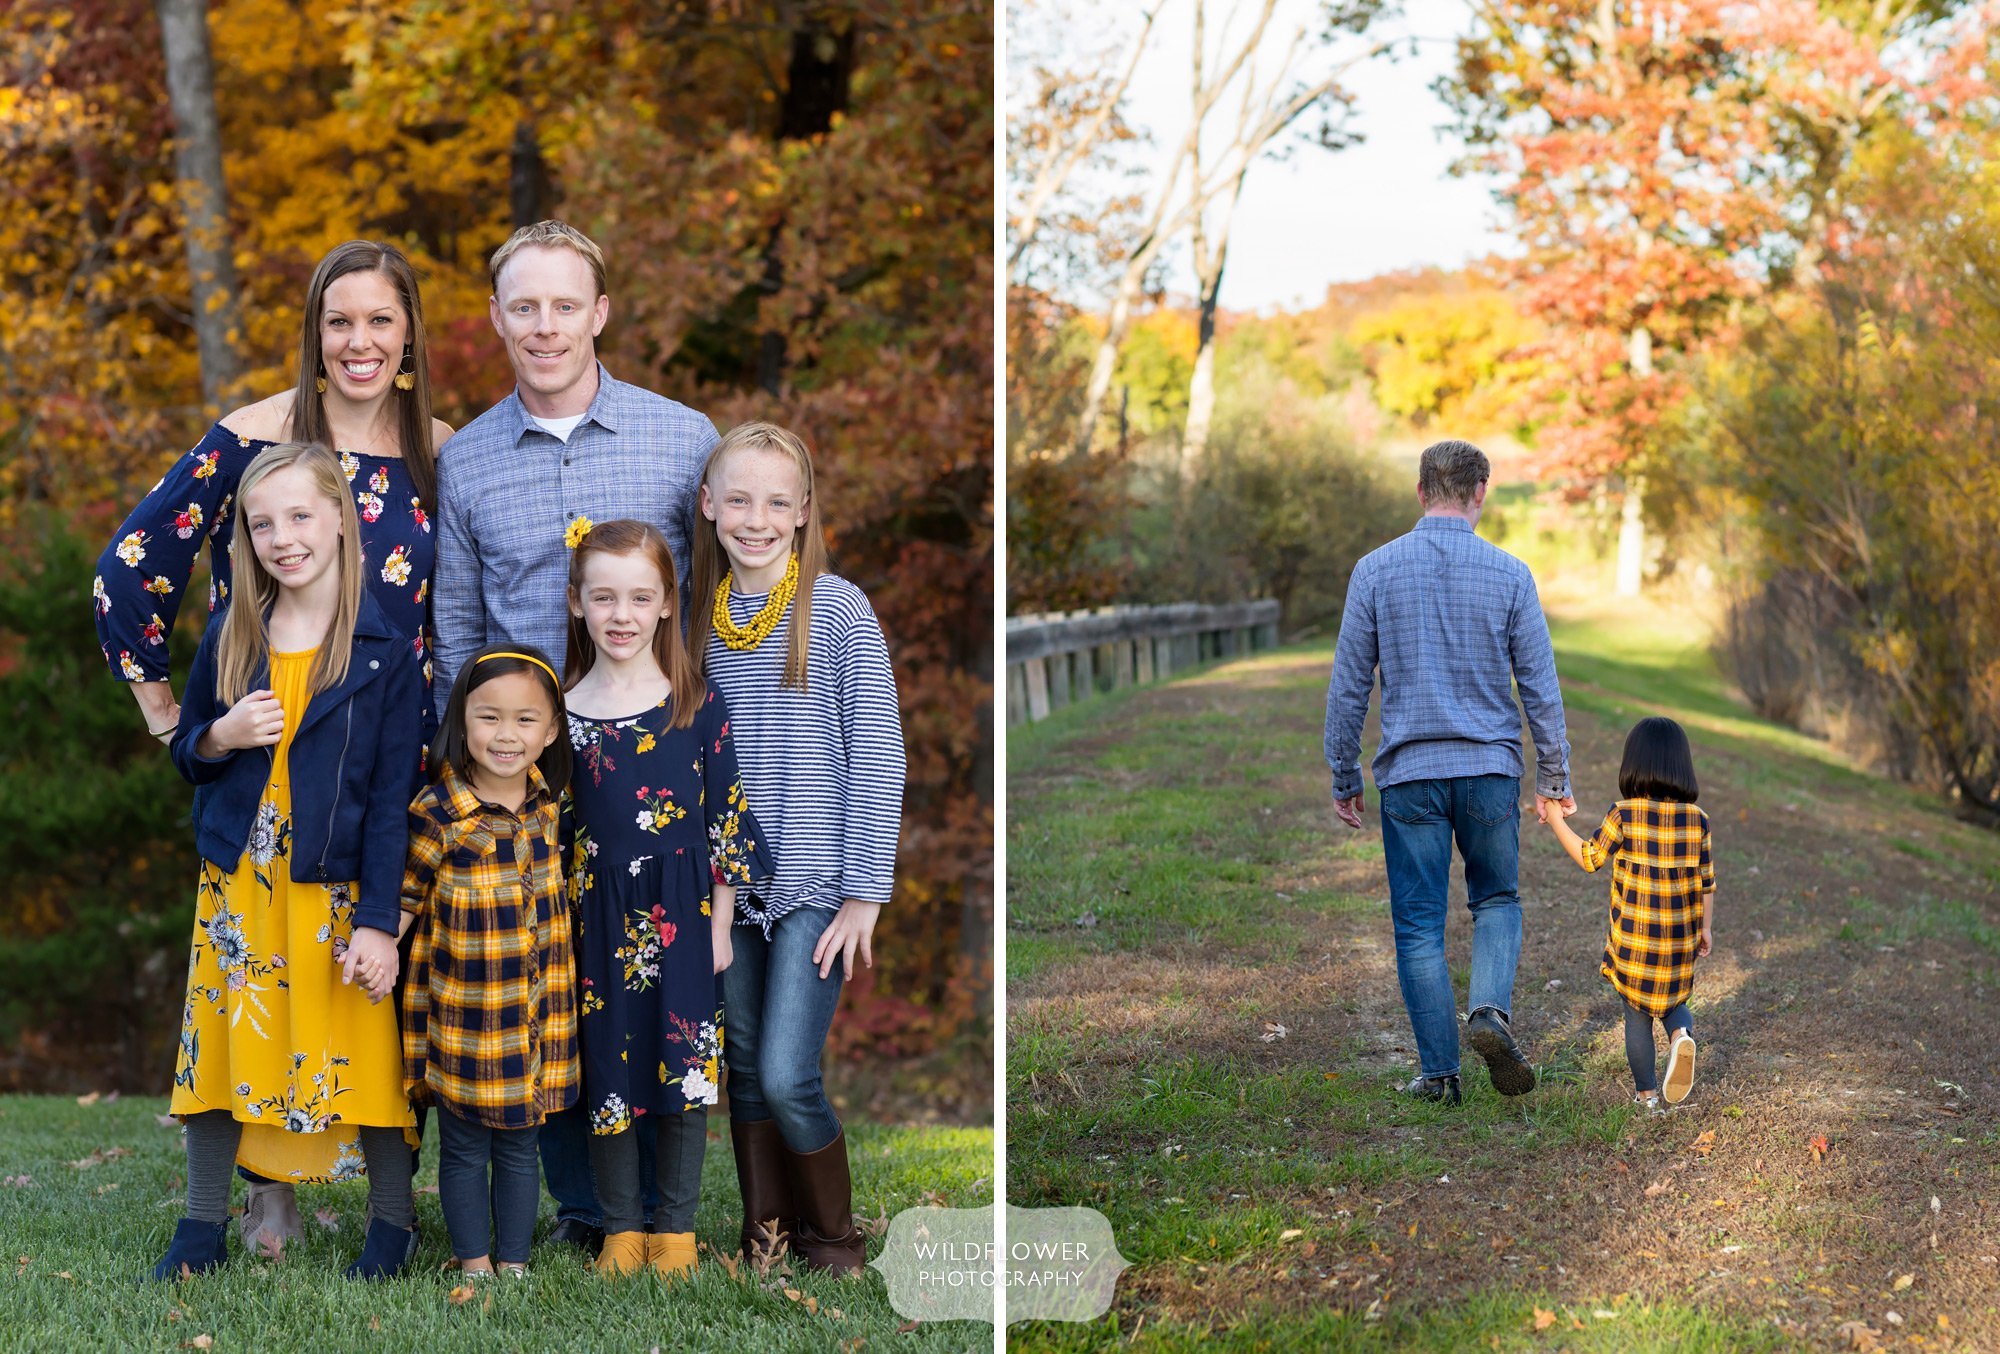 Fall family pictures means colorful foliage backdrops and navy and yellow colors.